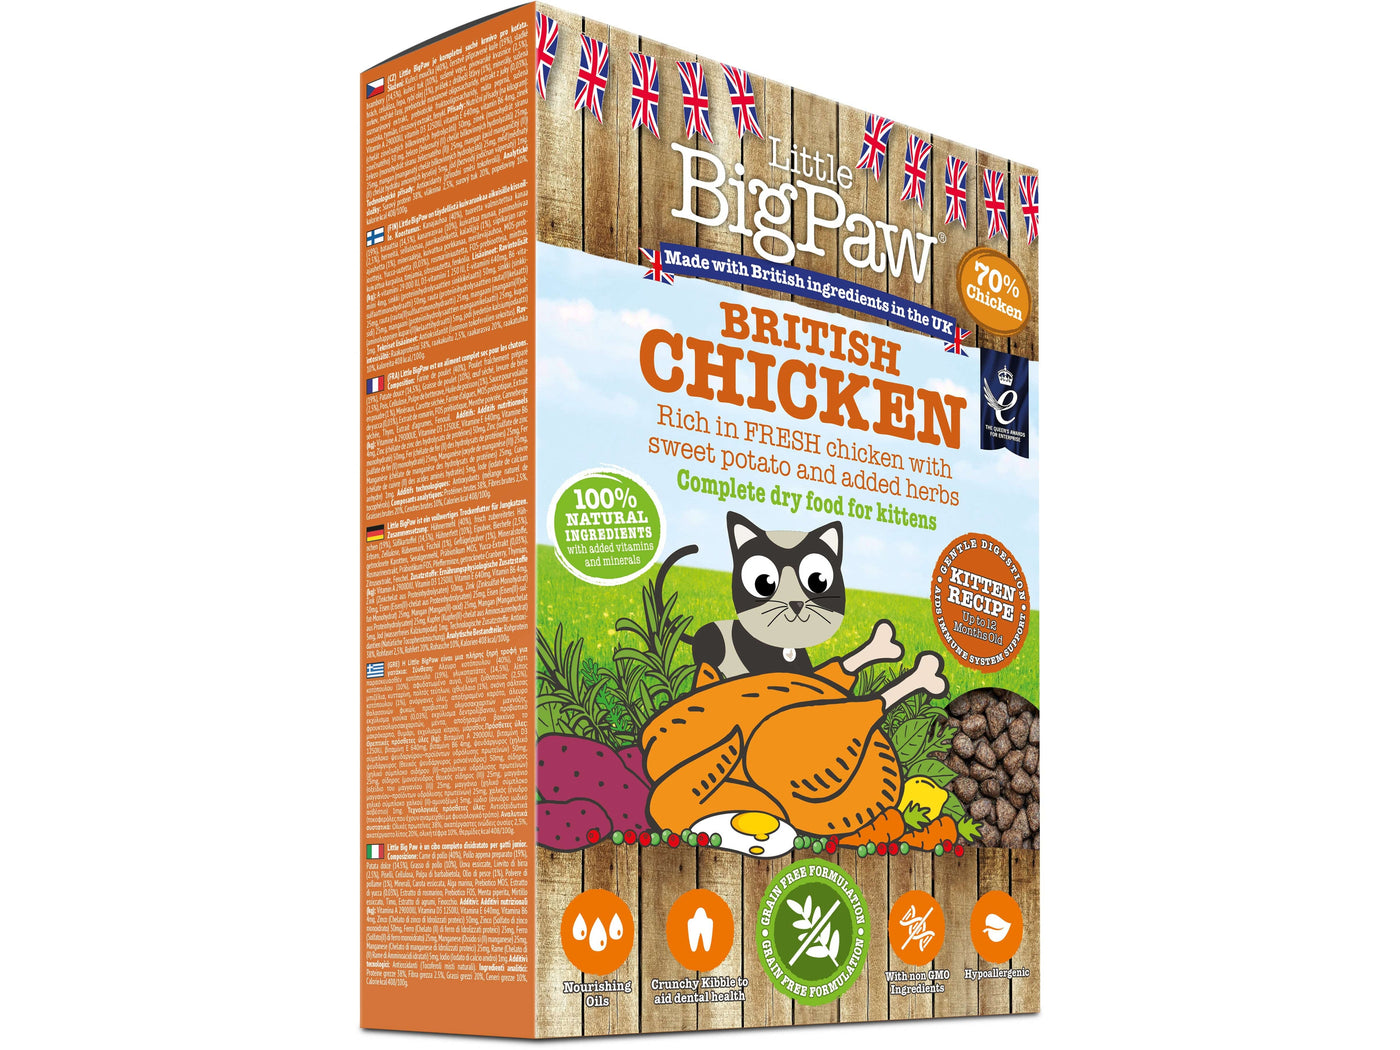 British Chicken Complete dry food for Kittens 375gm /Little BigPaw